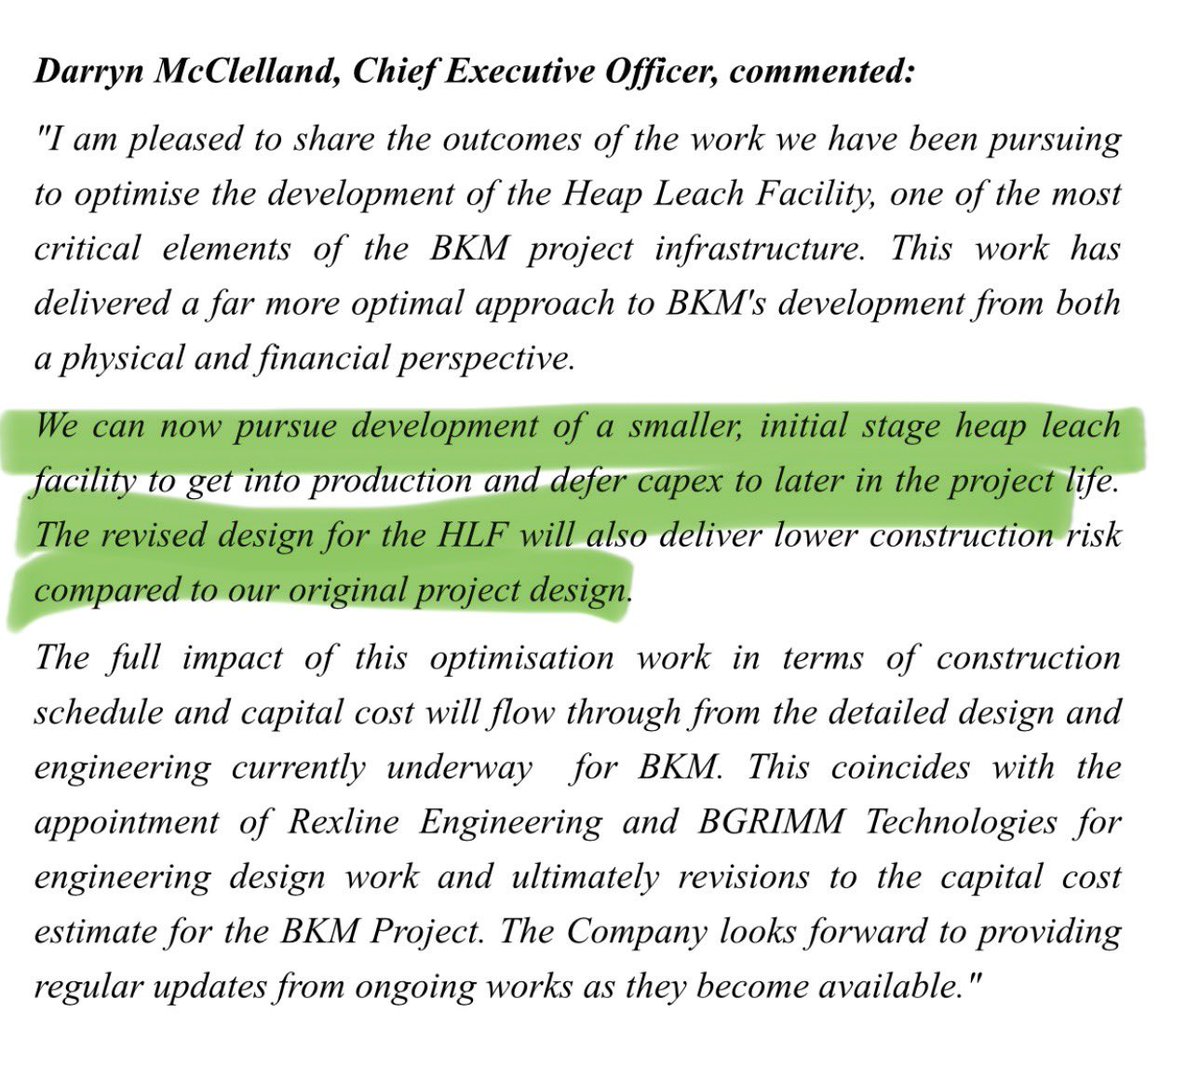 #ARS this is very good news. Essentially apart from the lower cost of capital they can get into production earlier with lower capex & defer some capex to later when the mine is in production. Means lower financing needed to get mine build underway.